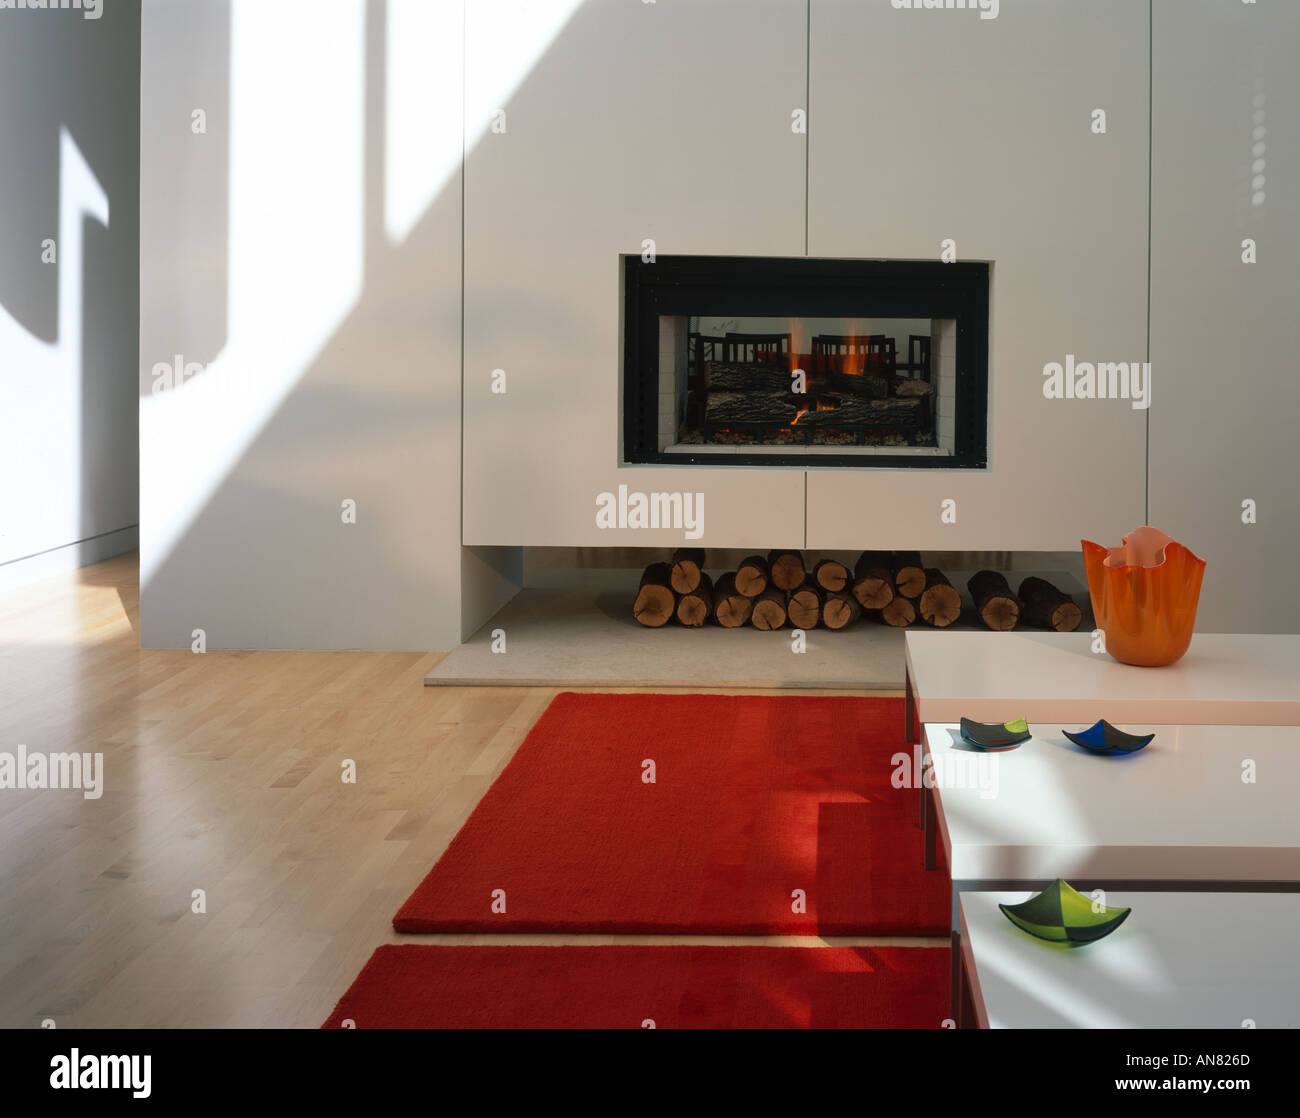 Oshry Residence, Bel Air, California. Lit fireplace in living area. Architect: SPF Architects Stock Photo